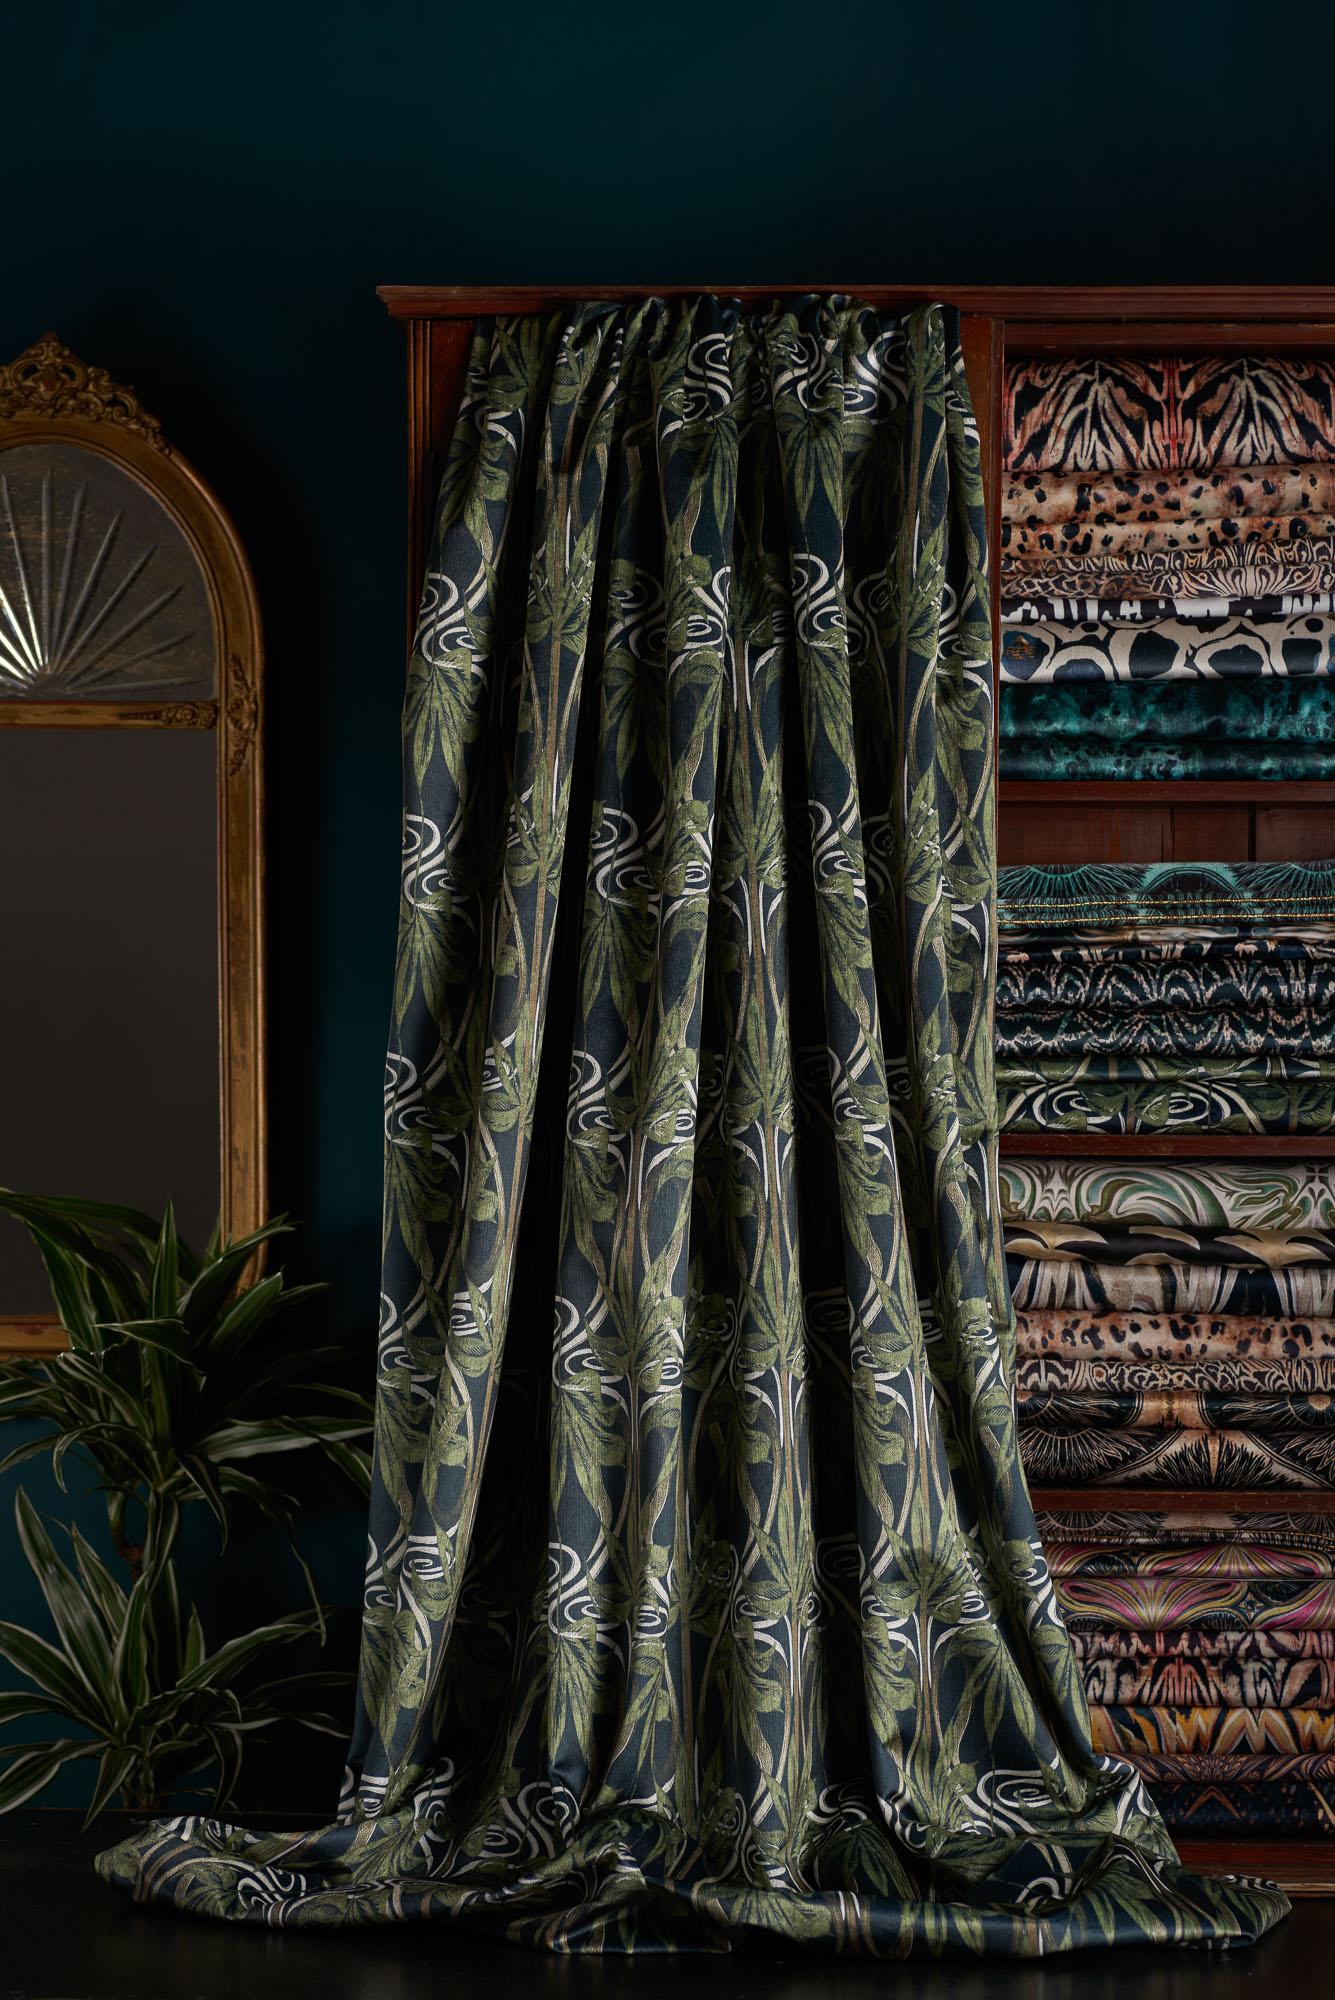 Dianne is a sandwiched print of two of Anna’s linocuts, pieced together to form a lyrical, jungle-like design which lends well to maximalist schemes. With a hint of Art Nouveau influence, this lush green colourway sits well with monochrome and